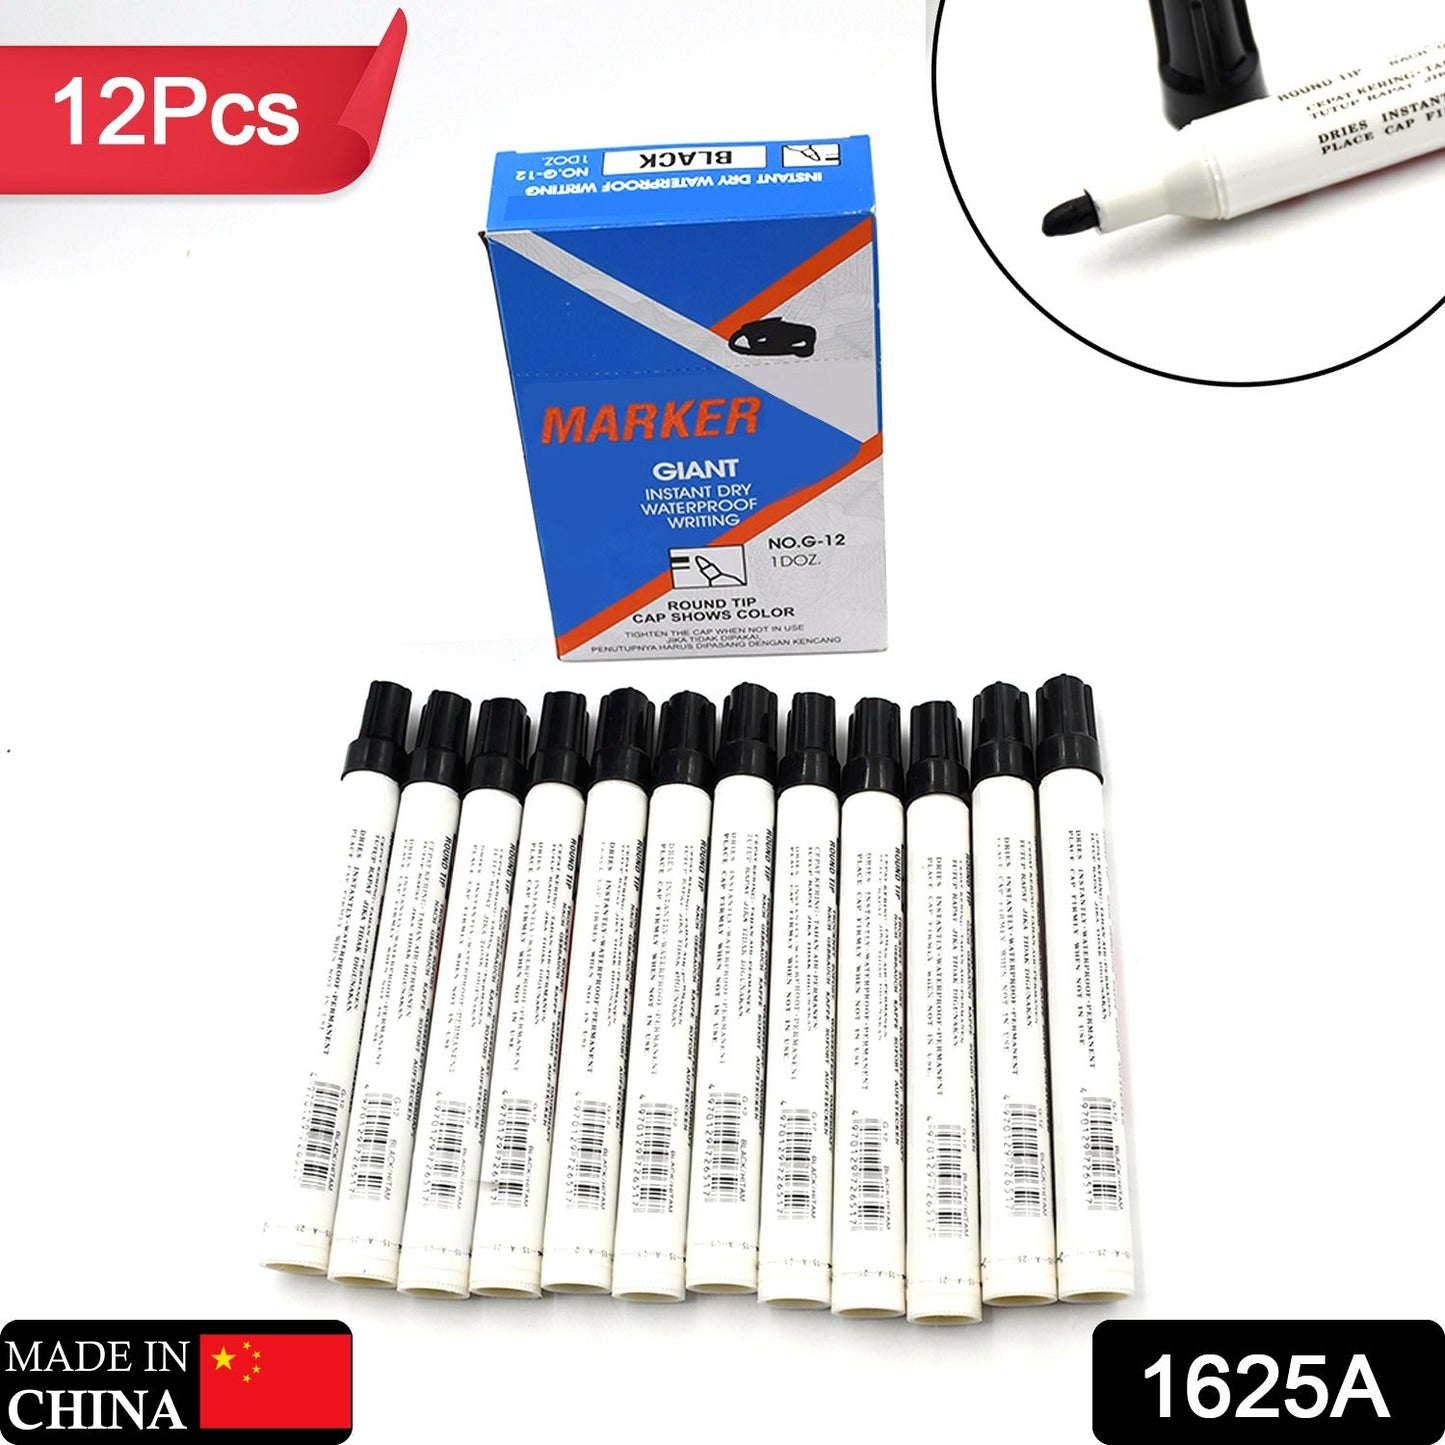 1625a BLACK PERMANENT MARKER LEAK PROOF MARKER CRAFTWORKS, SCHOOL PROJECTS AND OTHER | SUITABLE FOR OFFICE AND HOME USE (PACK OF 12 PC)